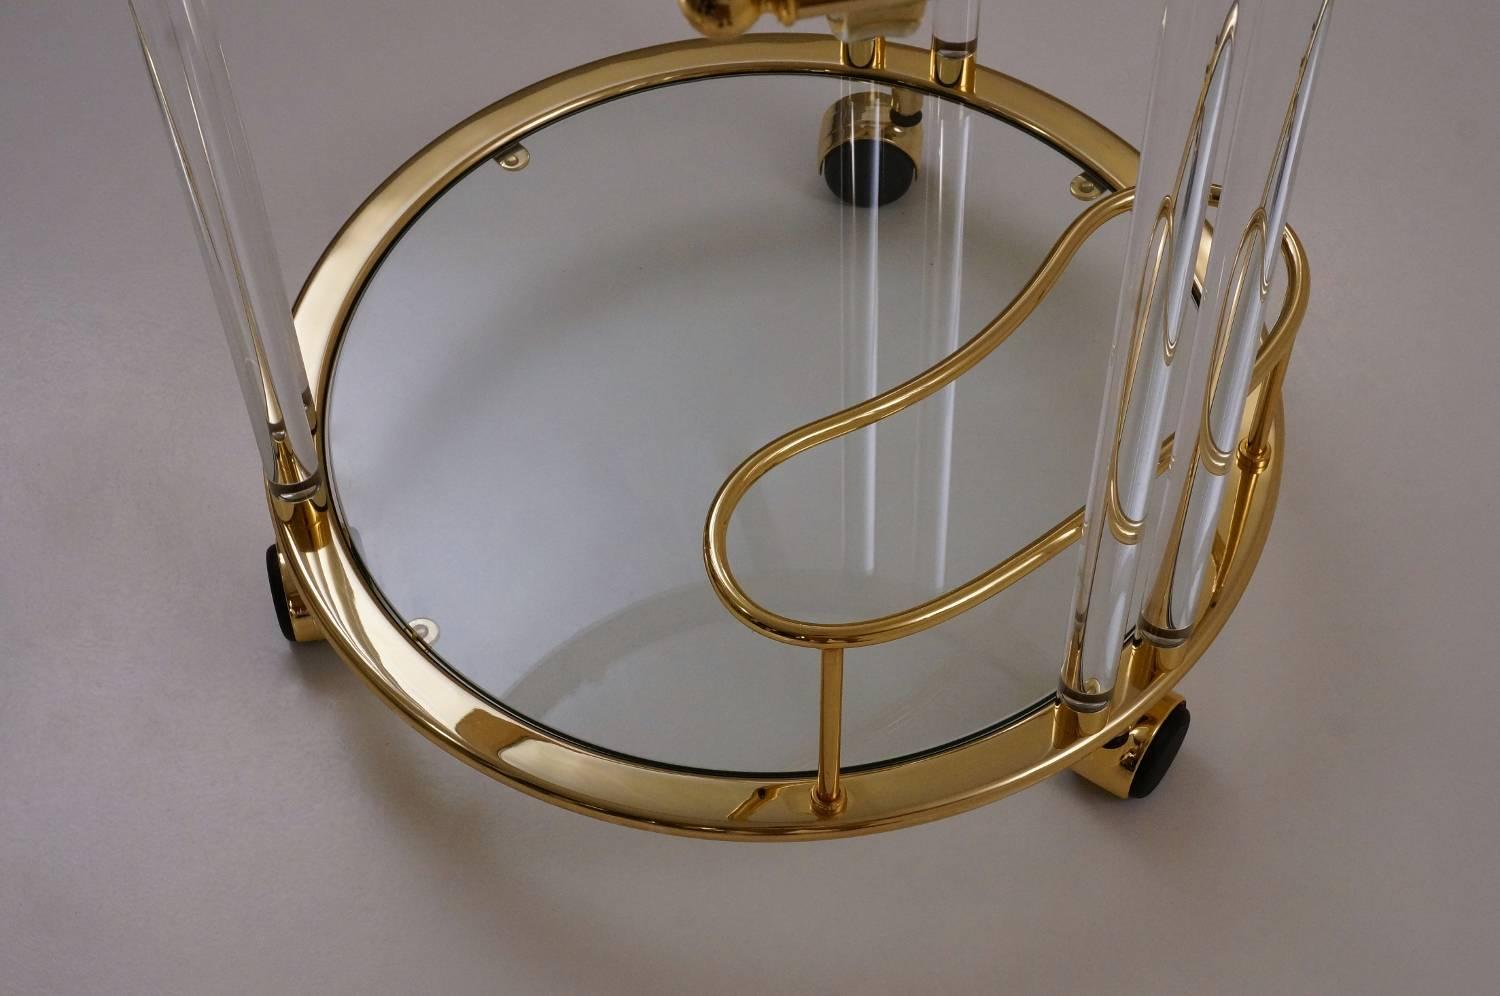 Italian Lucite, Glass and Brass Bar Cart or Trolley by Orsenigo, Italy, circa 1980 For Sale